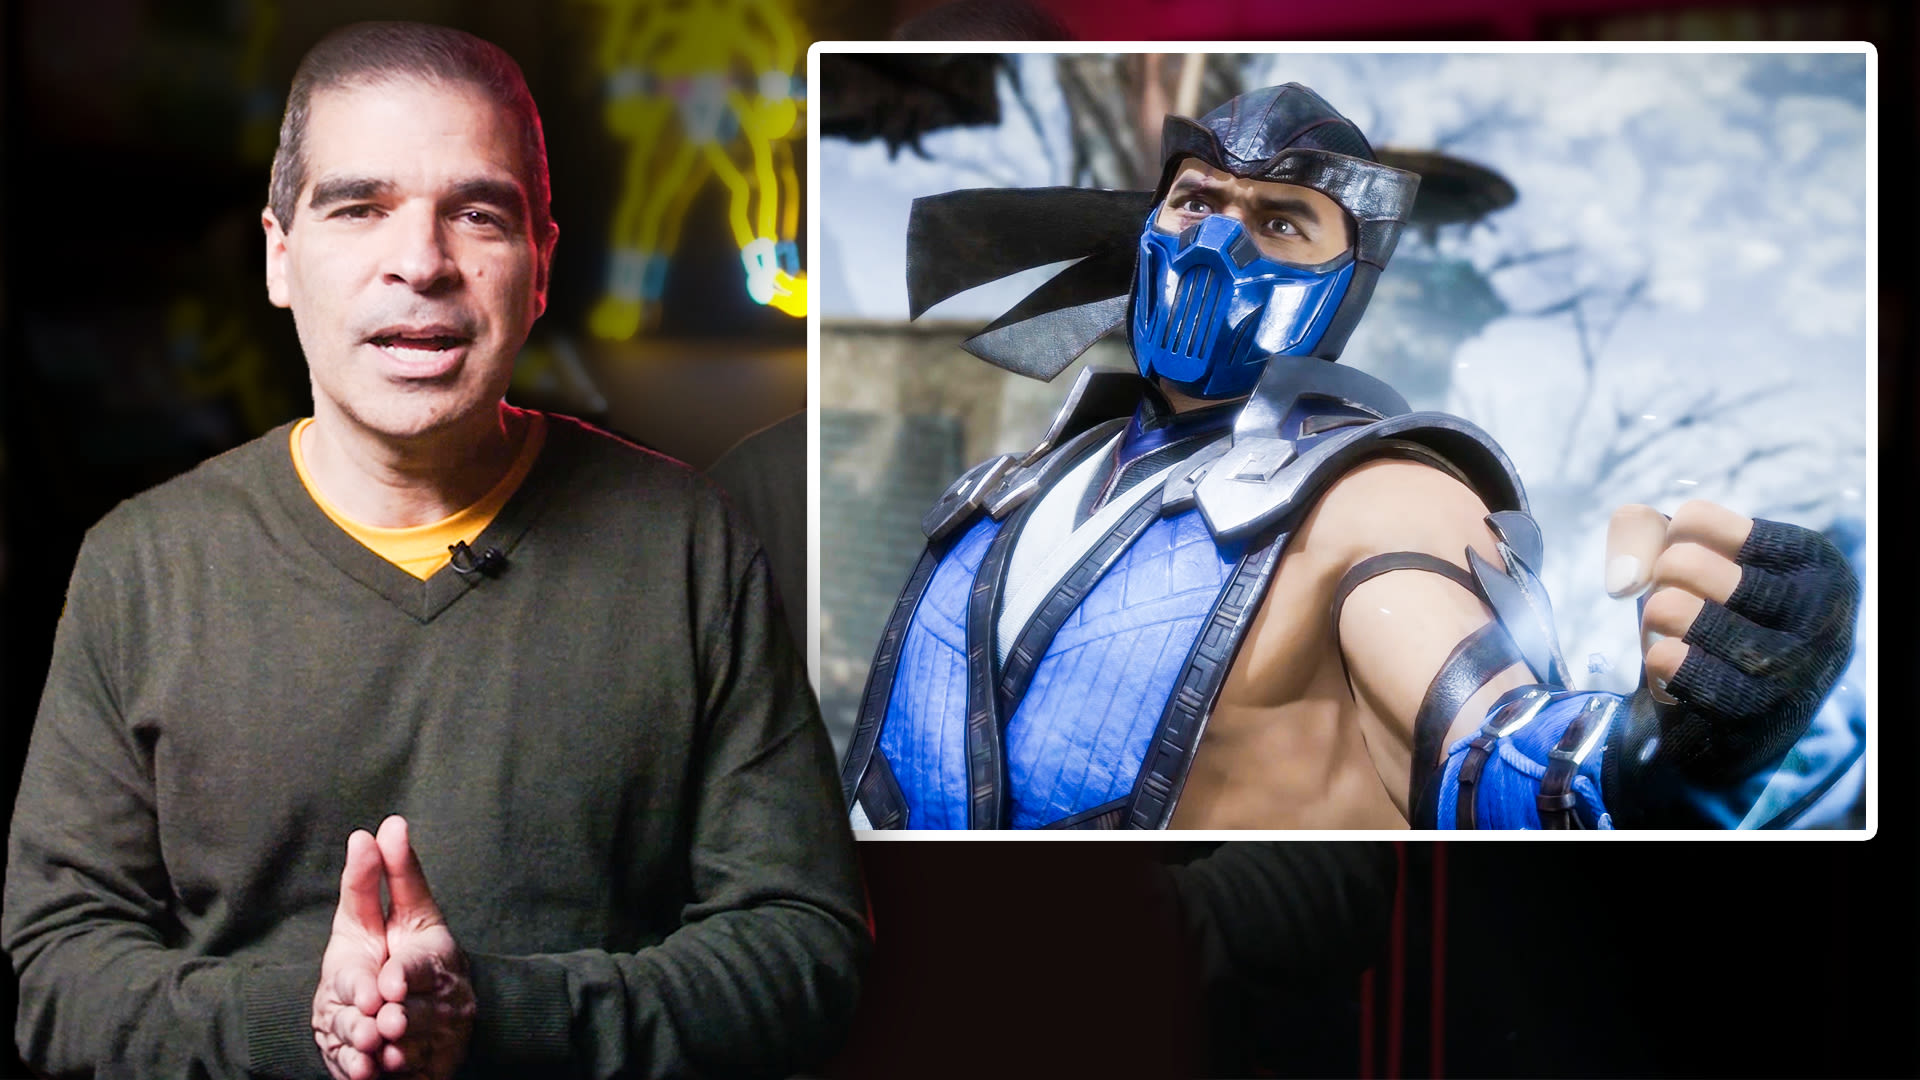 Mortal Kombat's Ed Boon Reveals OG Game Almost Didn't Have Fatalities